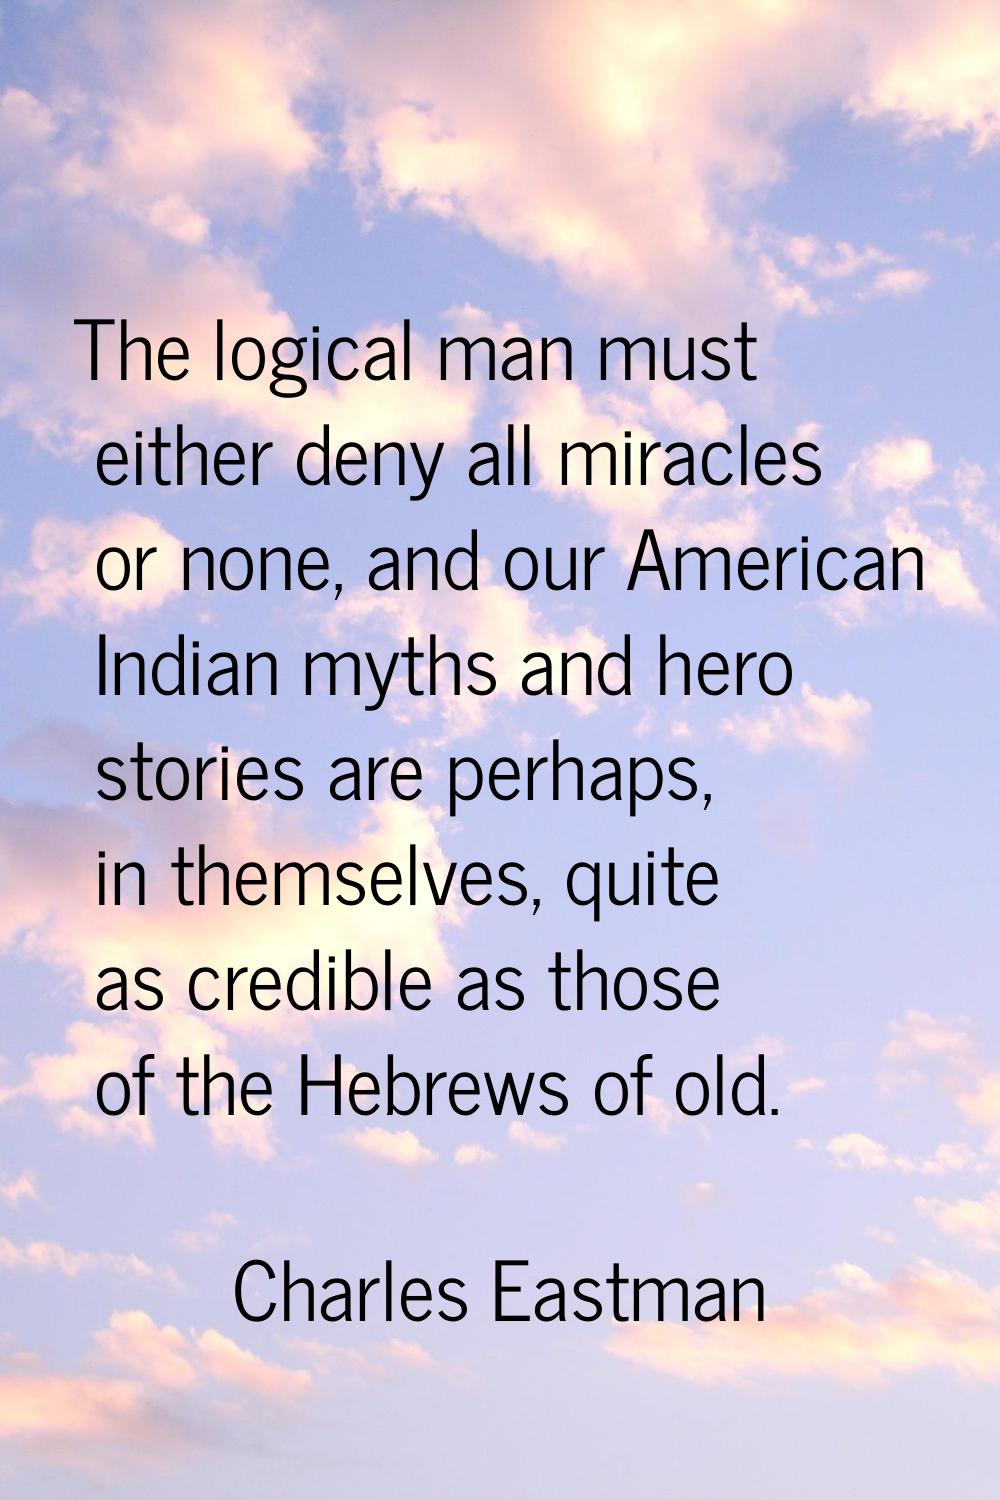 The logical man must either deny all miracles or none, and our American Indian myths and hero stori